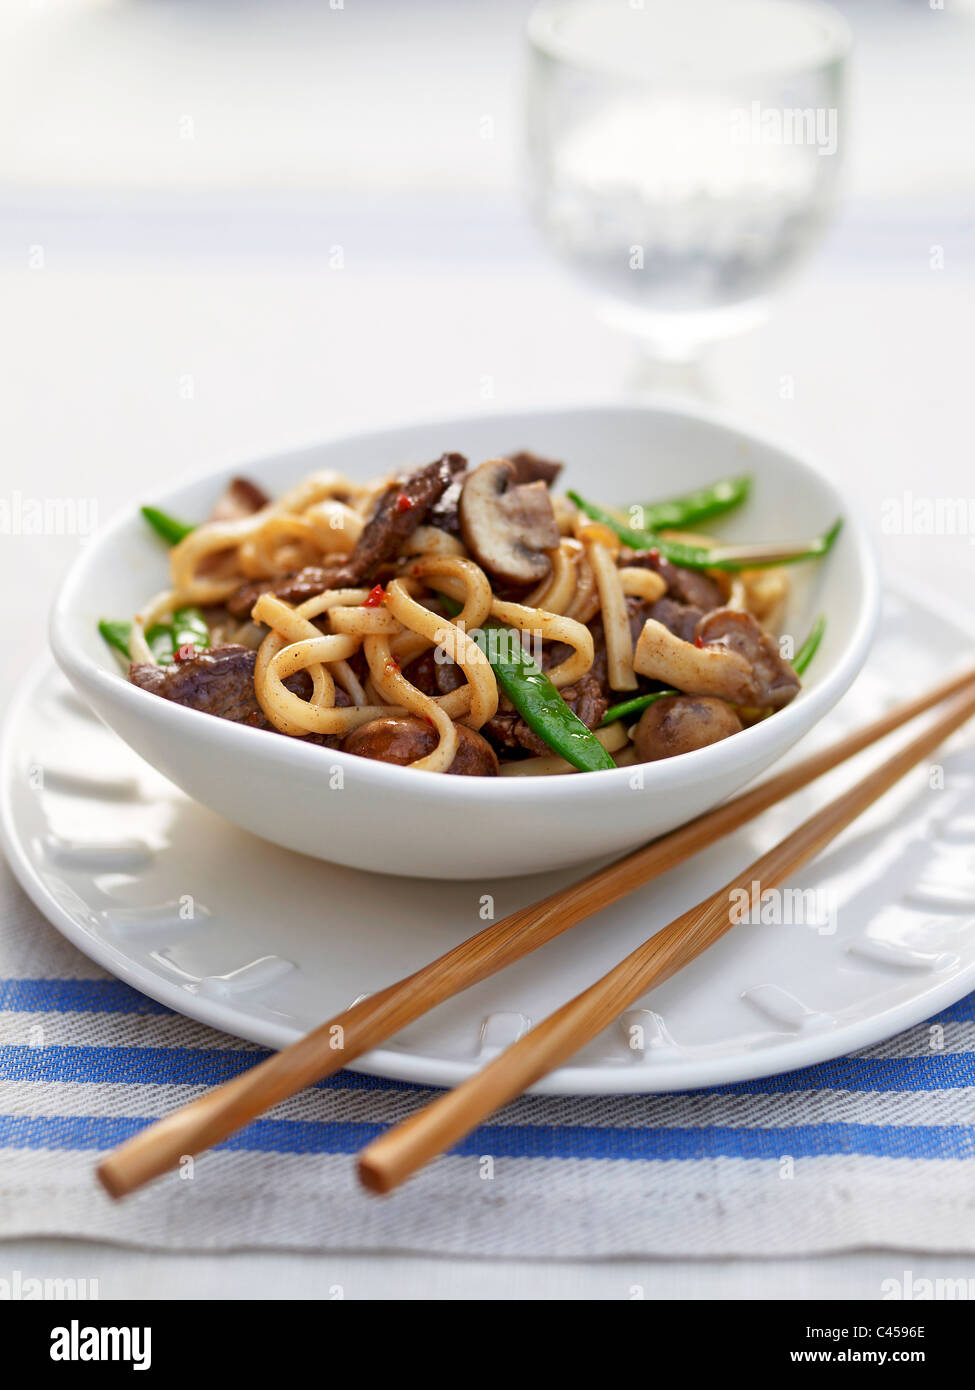 Bowl of ginger beef noodles on plate, close-up Stock Photo